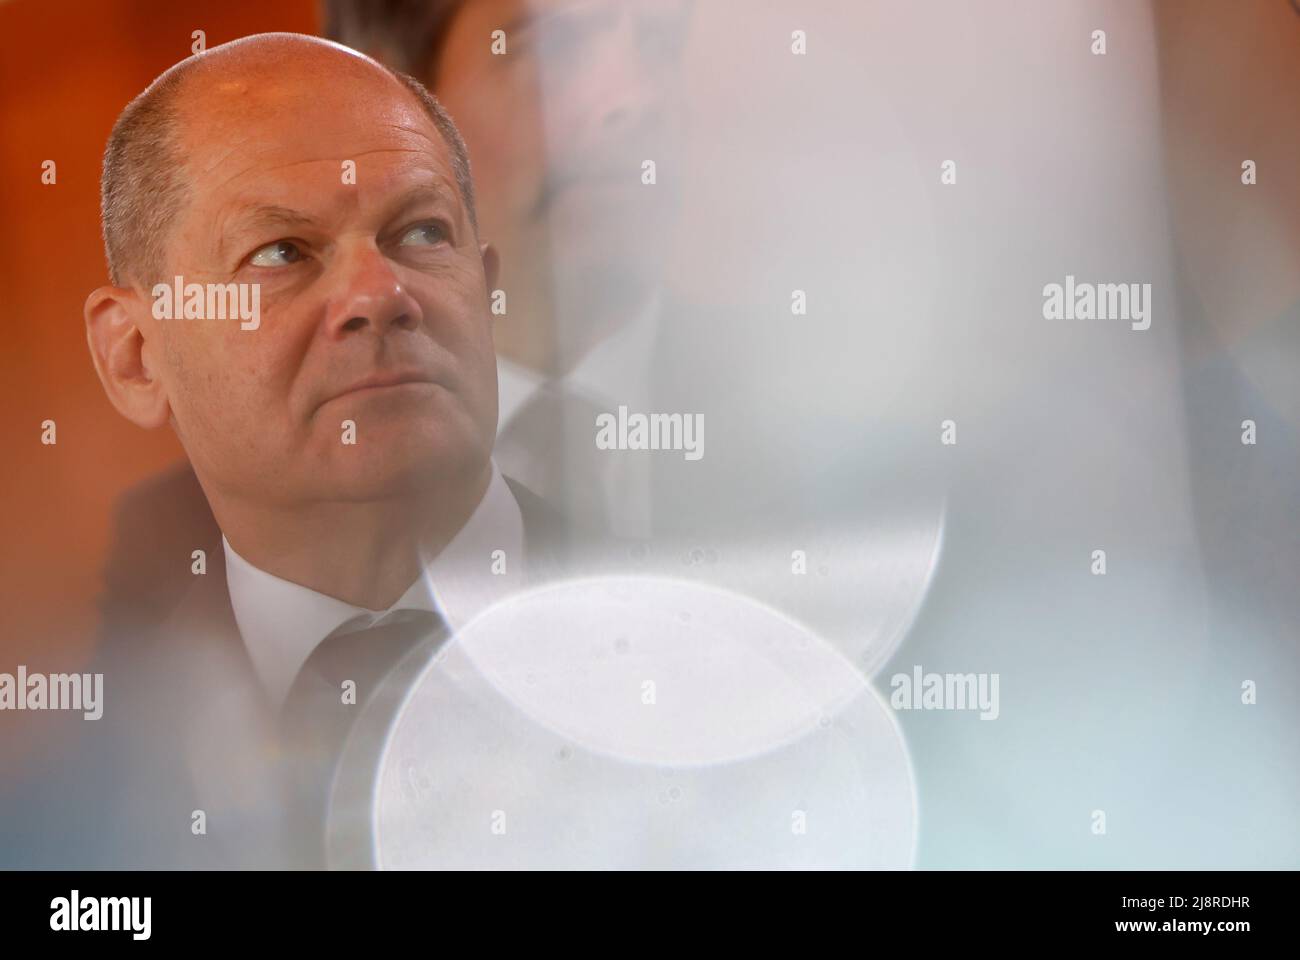 Germany's Chancellor Olaf Scholz arrives for the weekly cabinet meeting session in the German Federal Chancellery in Berlin, Germany May 18, 2022. REUTERS/Hannibal Hanschke Stock Photo